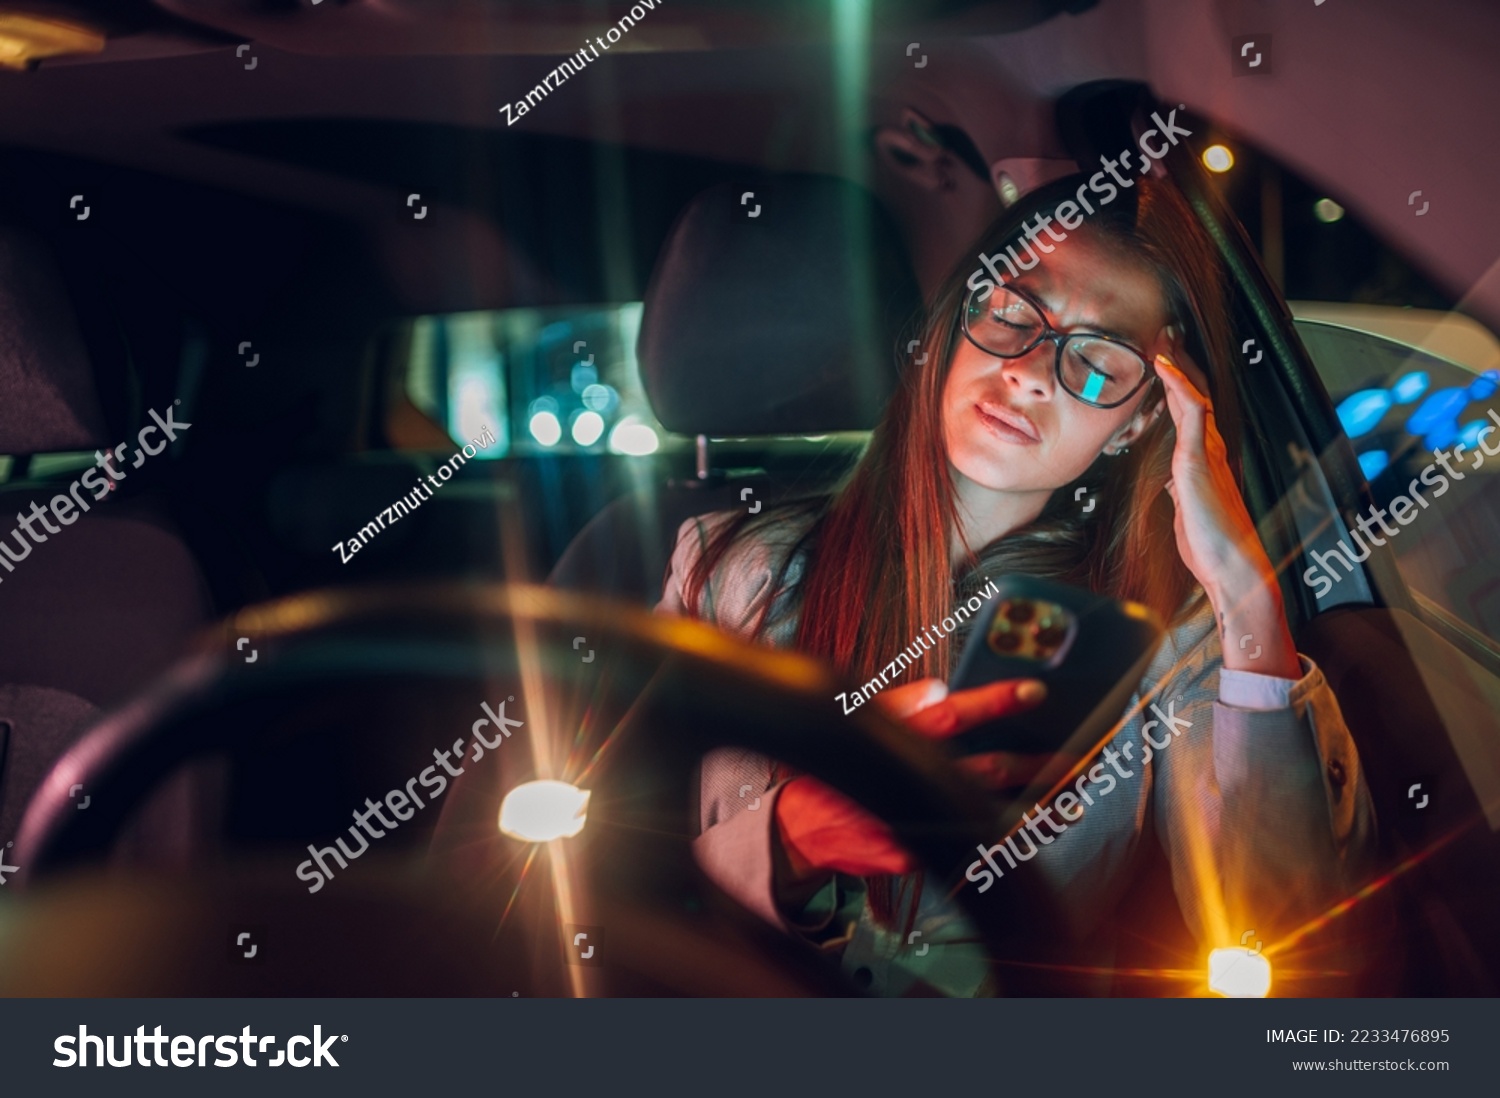 Businesswoman driver sitting in car checking mobile phone while riding in urban city. Young woman looking at smartphone while commuting from work at night. Having a headache and feeling tired. #2233476895